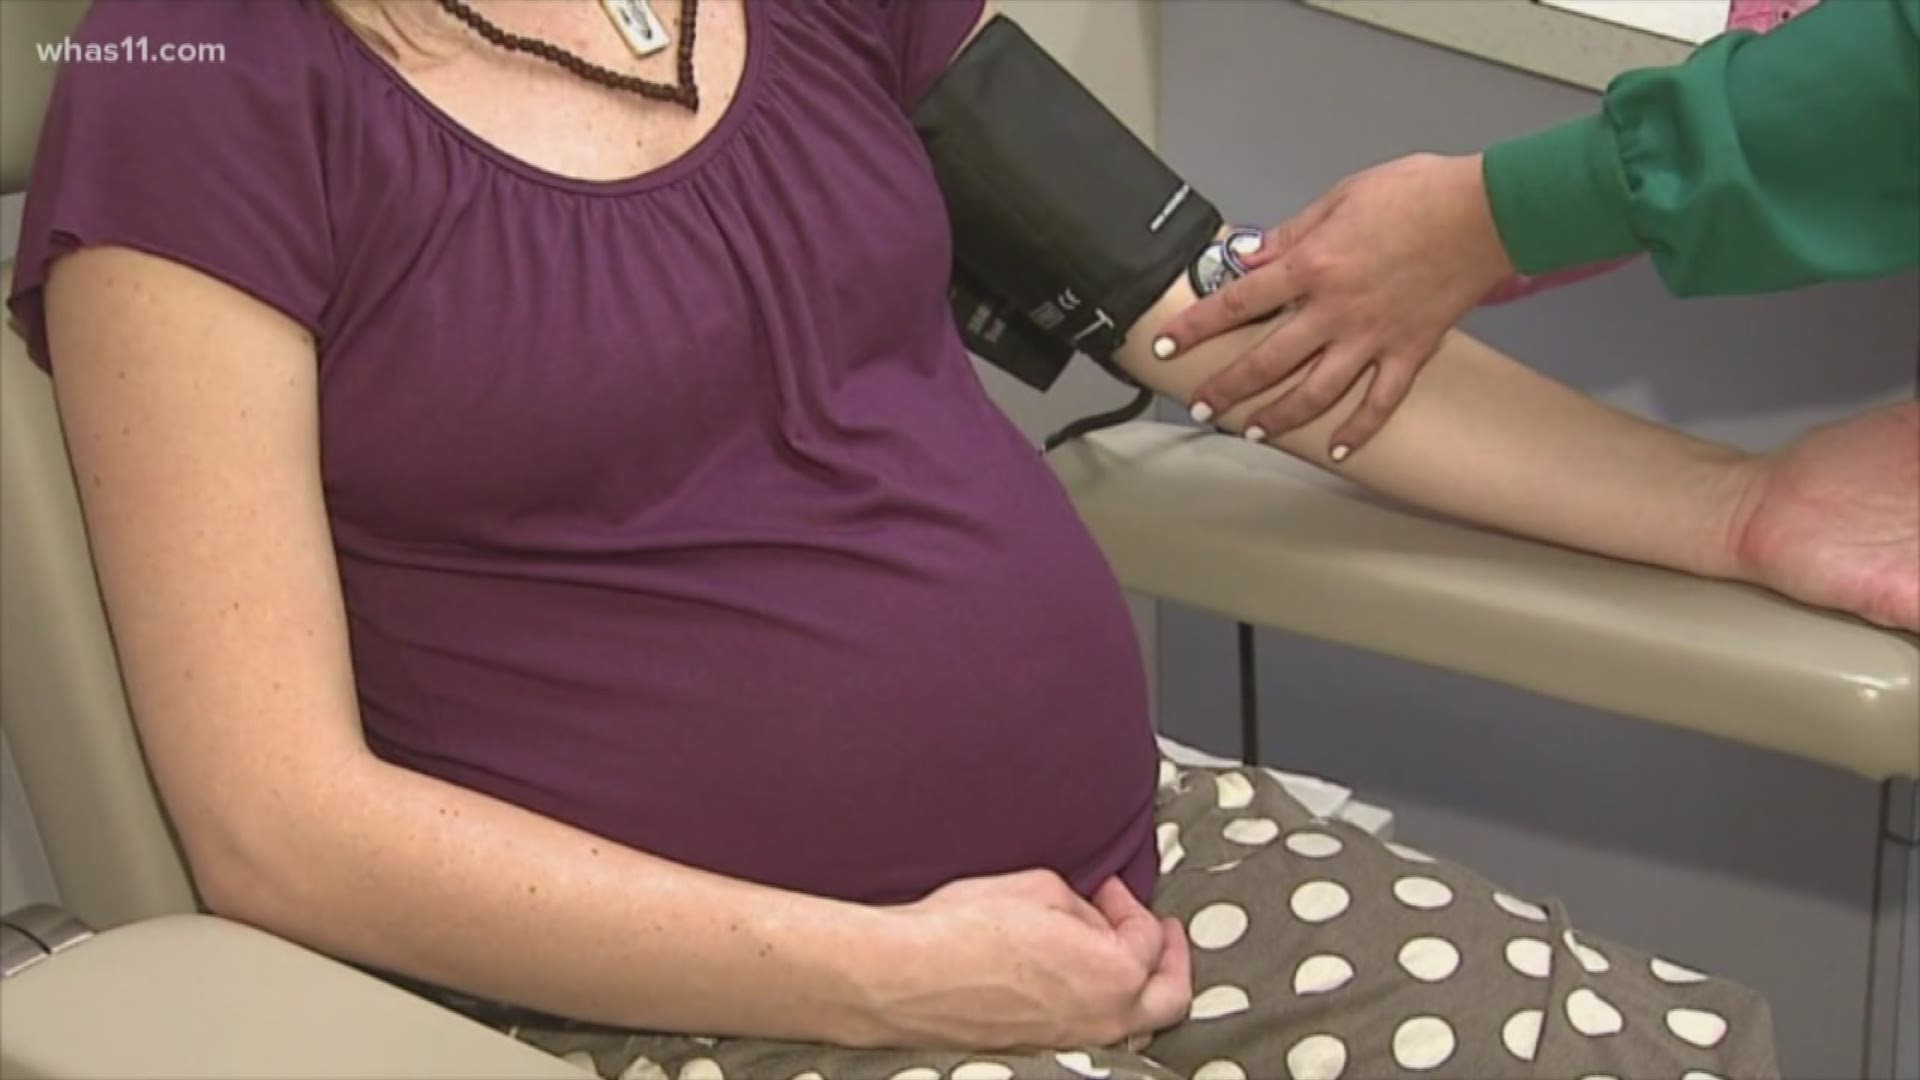 January 23 is officially Maternal Health Awareness Day in the Commonwealth. Local hospitals hope to spread information about postpartum health.